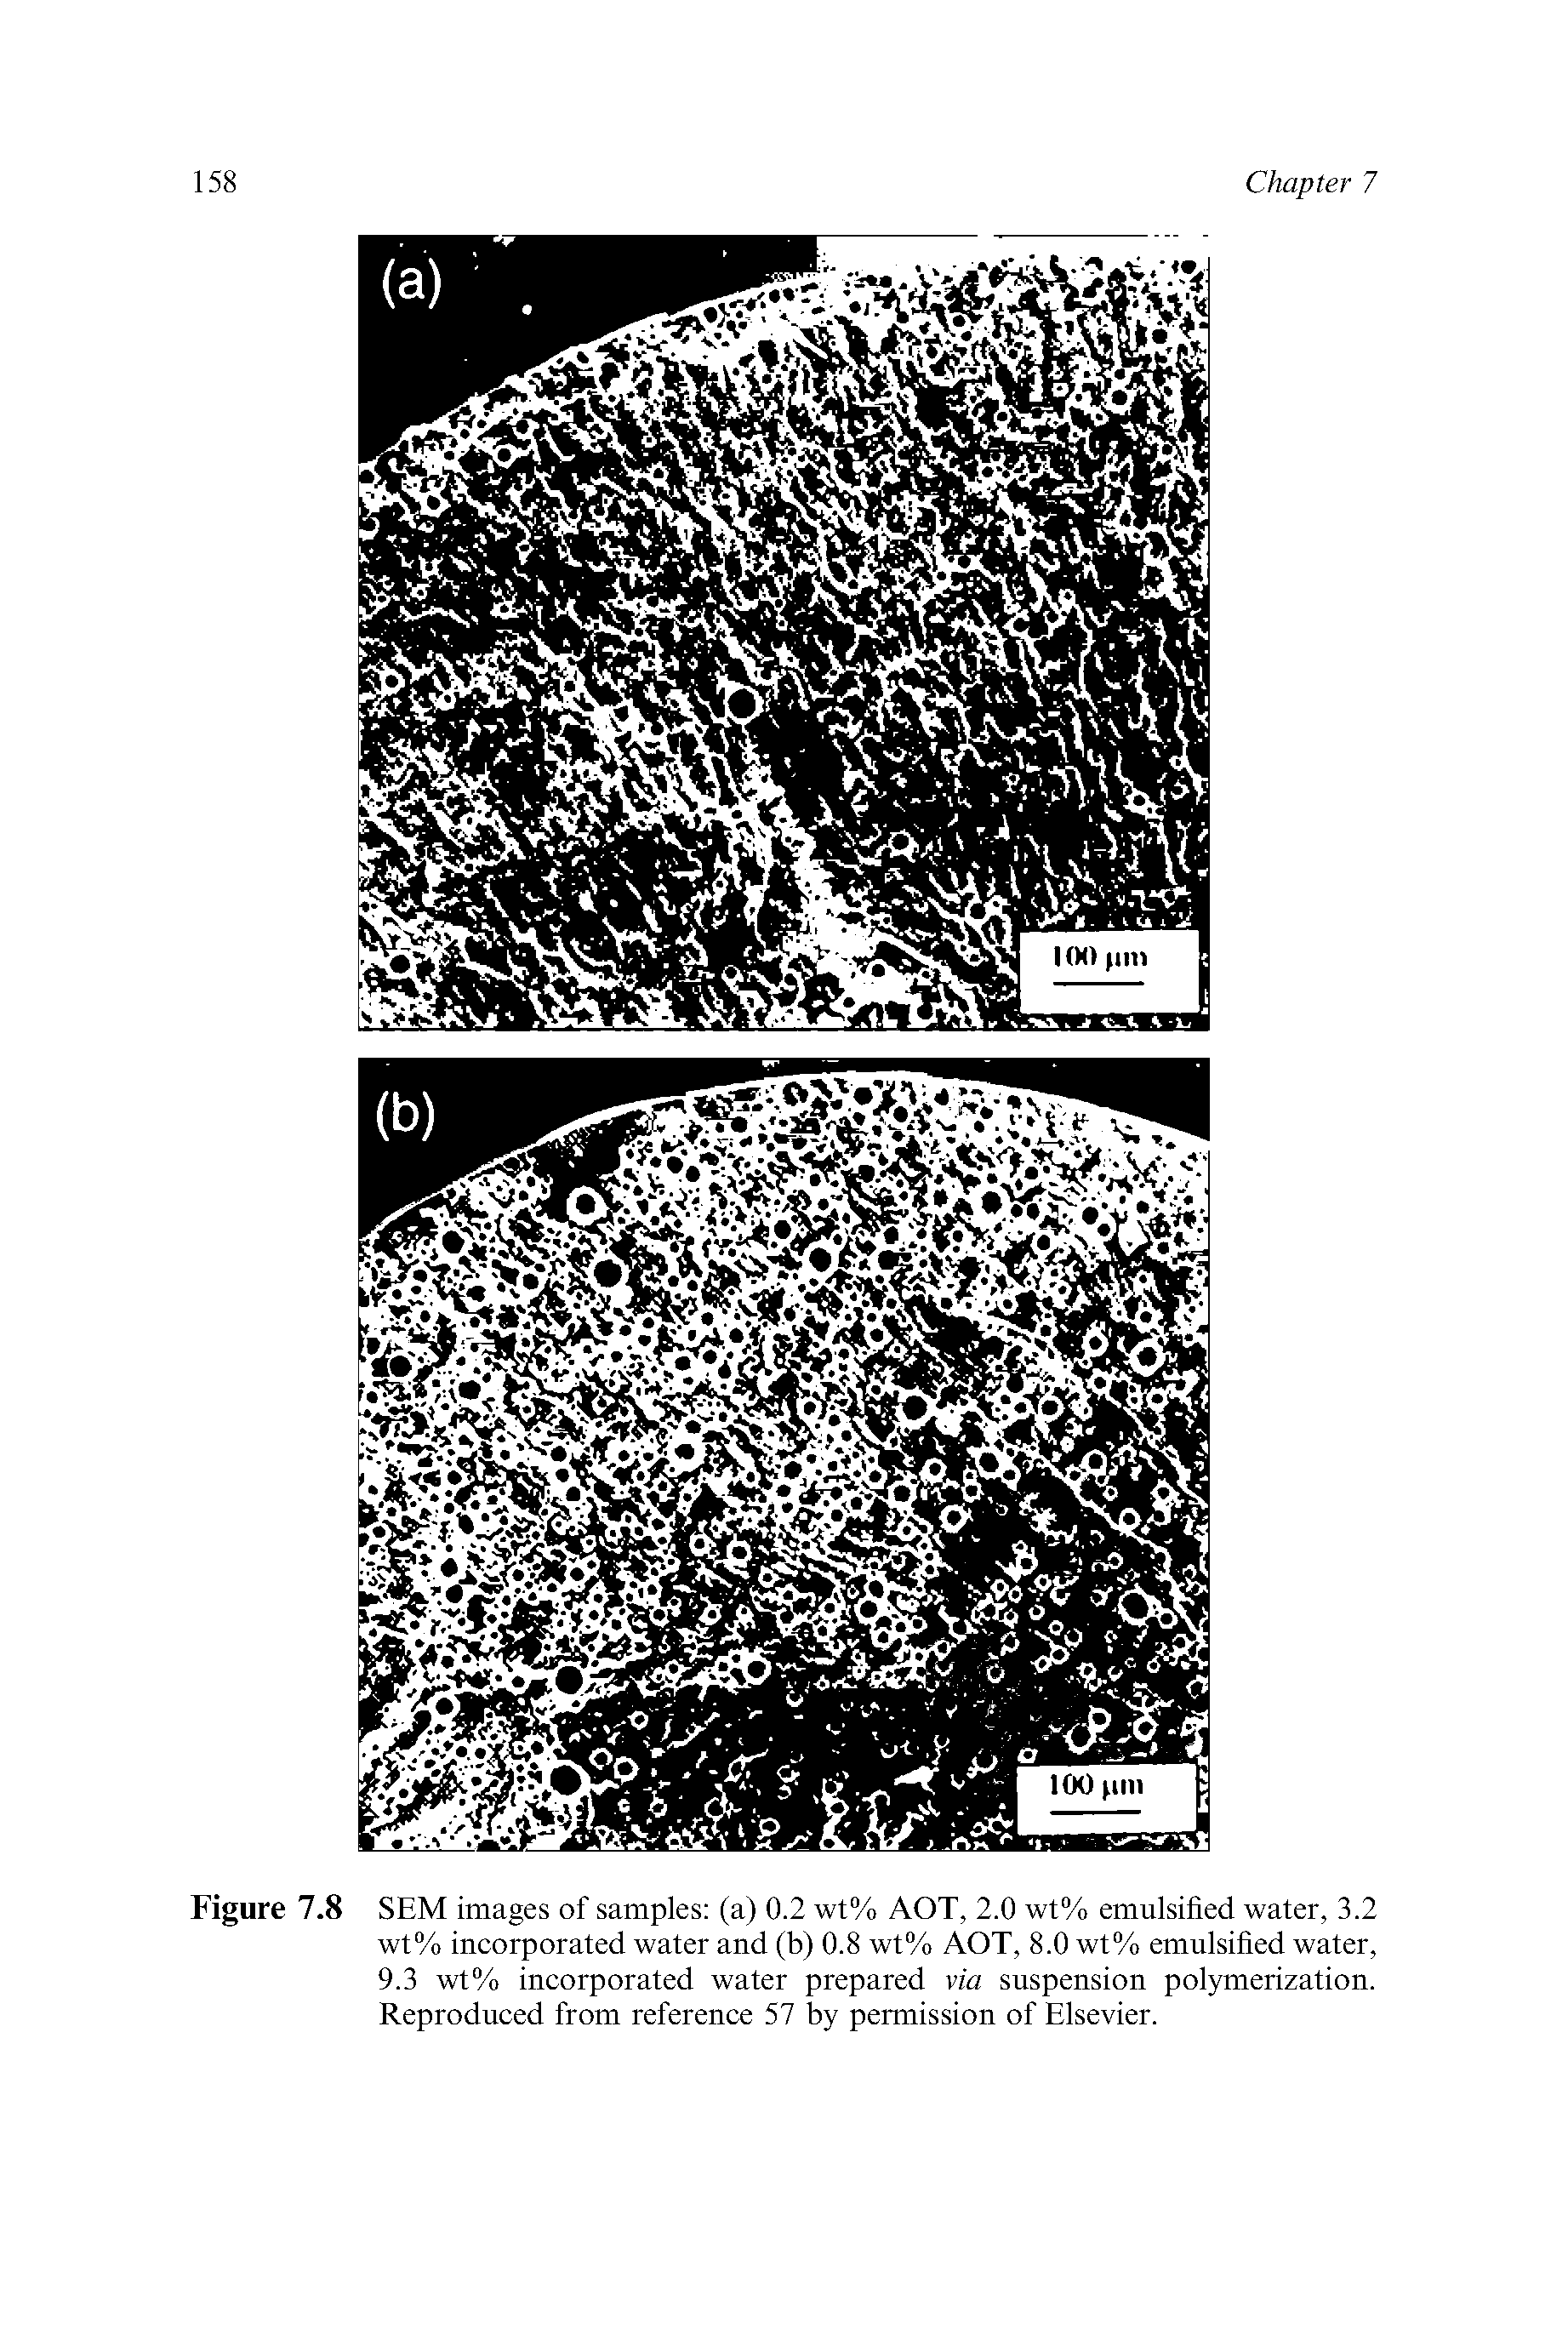 Figure 7.8 SEM images of samples (a) 0.2 wt% AOT, 2.0 wt% emulsified water, 3.2 wt% incorporated water and (b) 0.8 wt% AOT, 8.0 wt% emulsified water, 9.3 wt% incorporated water prepared via suspension polymerization. Reproduced from reference 57 by permission of Elsevier.